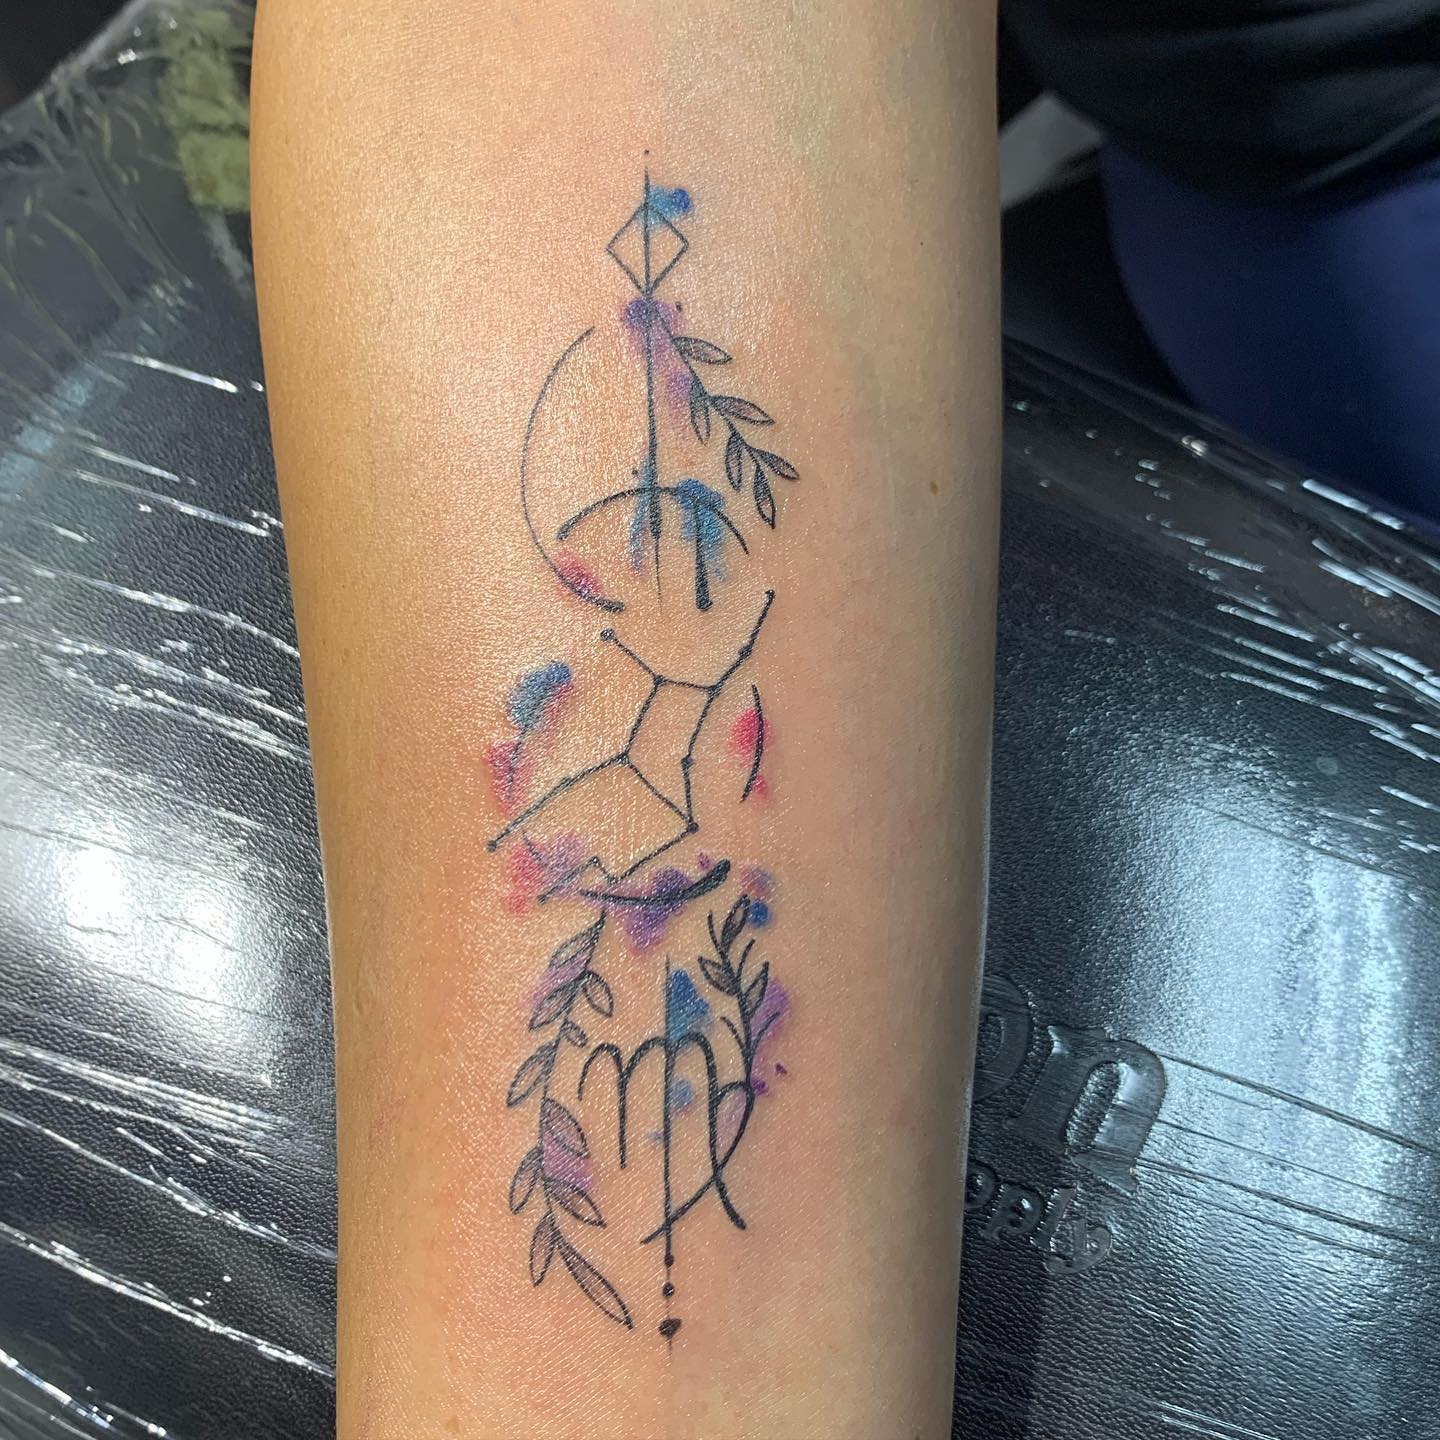 Every design you can imagine about Virgo tattoo is here. Your sign, constellation mark and a virgo are packed in just one tattoo. Watercolor effect adds an extra beauty to it.